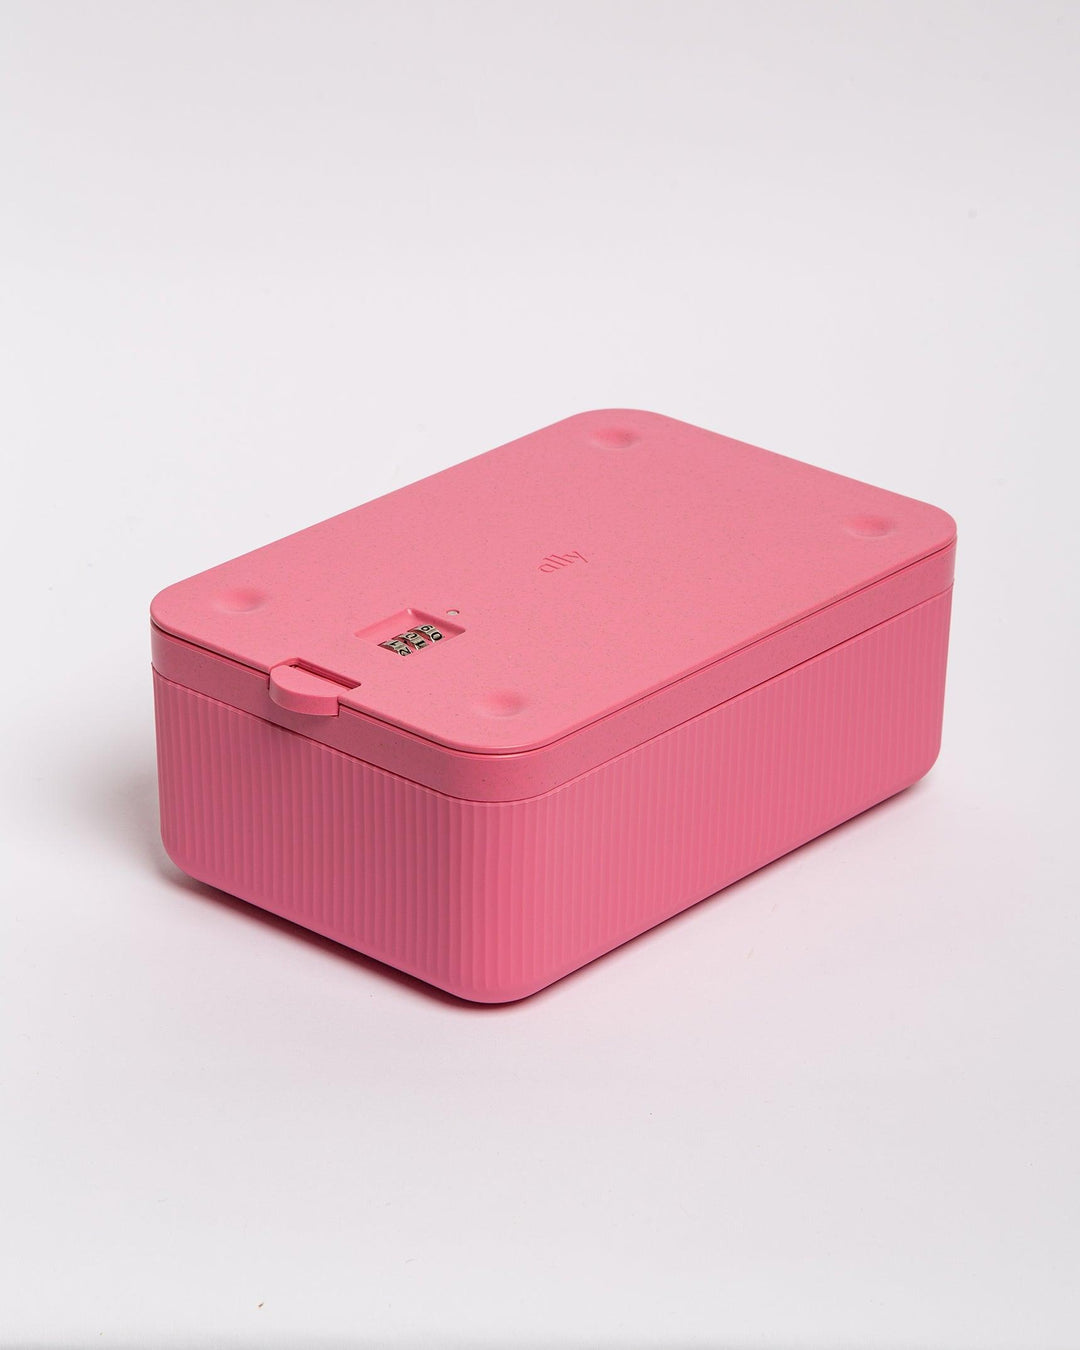 Closed pink stash box with secure combination lock.